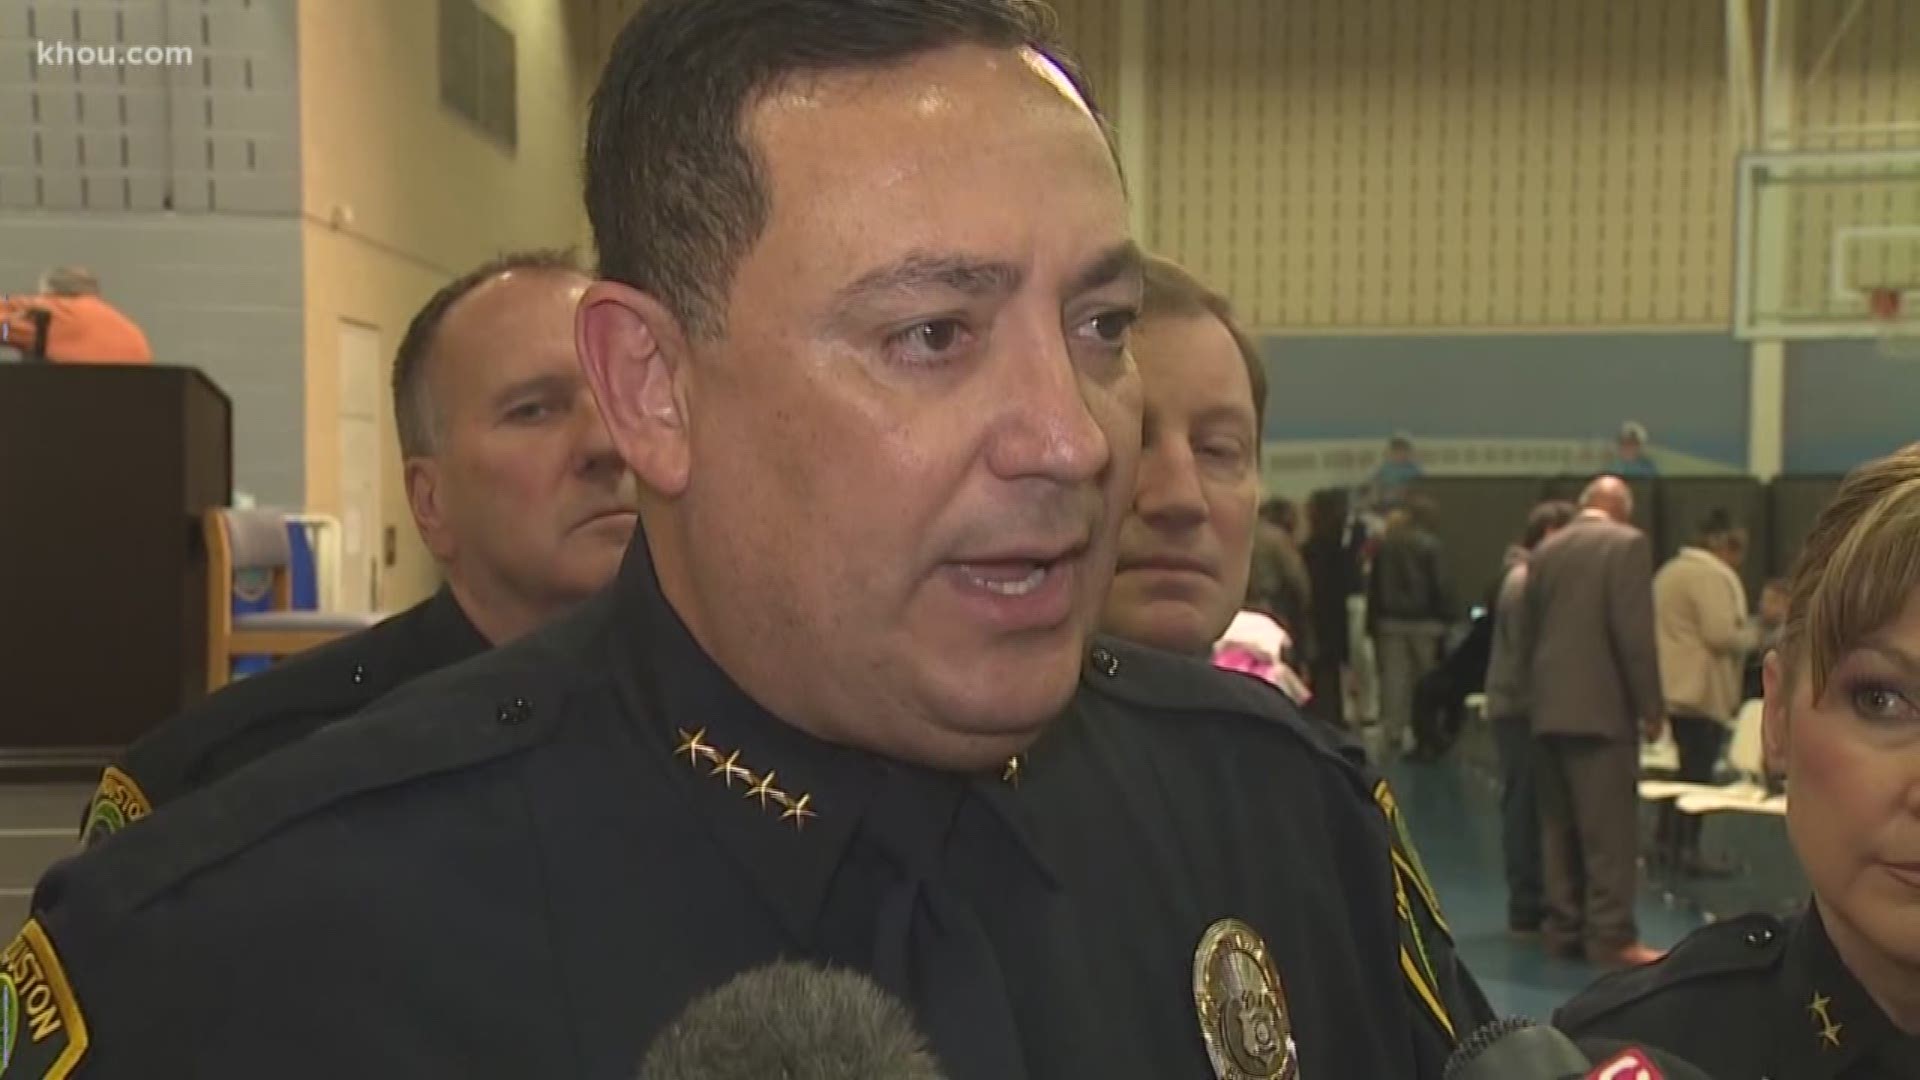 HPD Chief Art Acevedo spoke about the questions raised regarding what was inside the house where a deadly raid occurred.